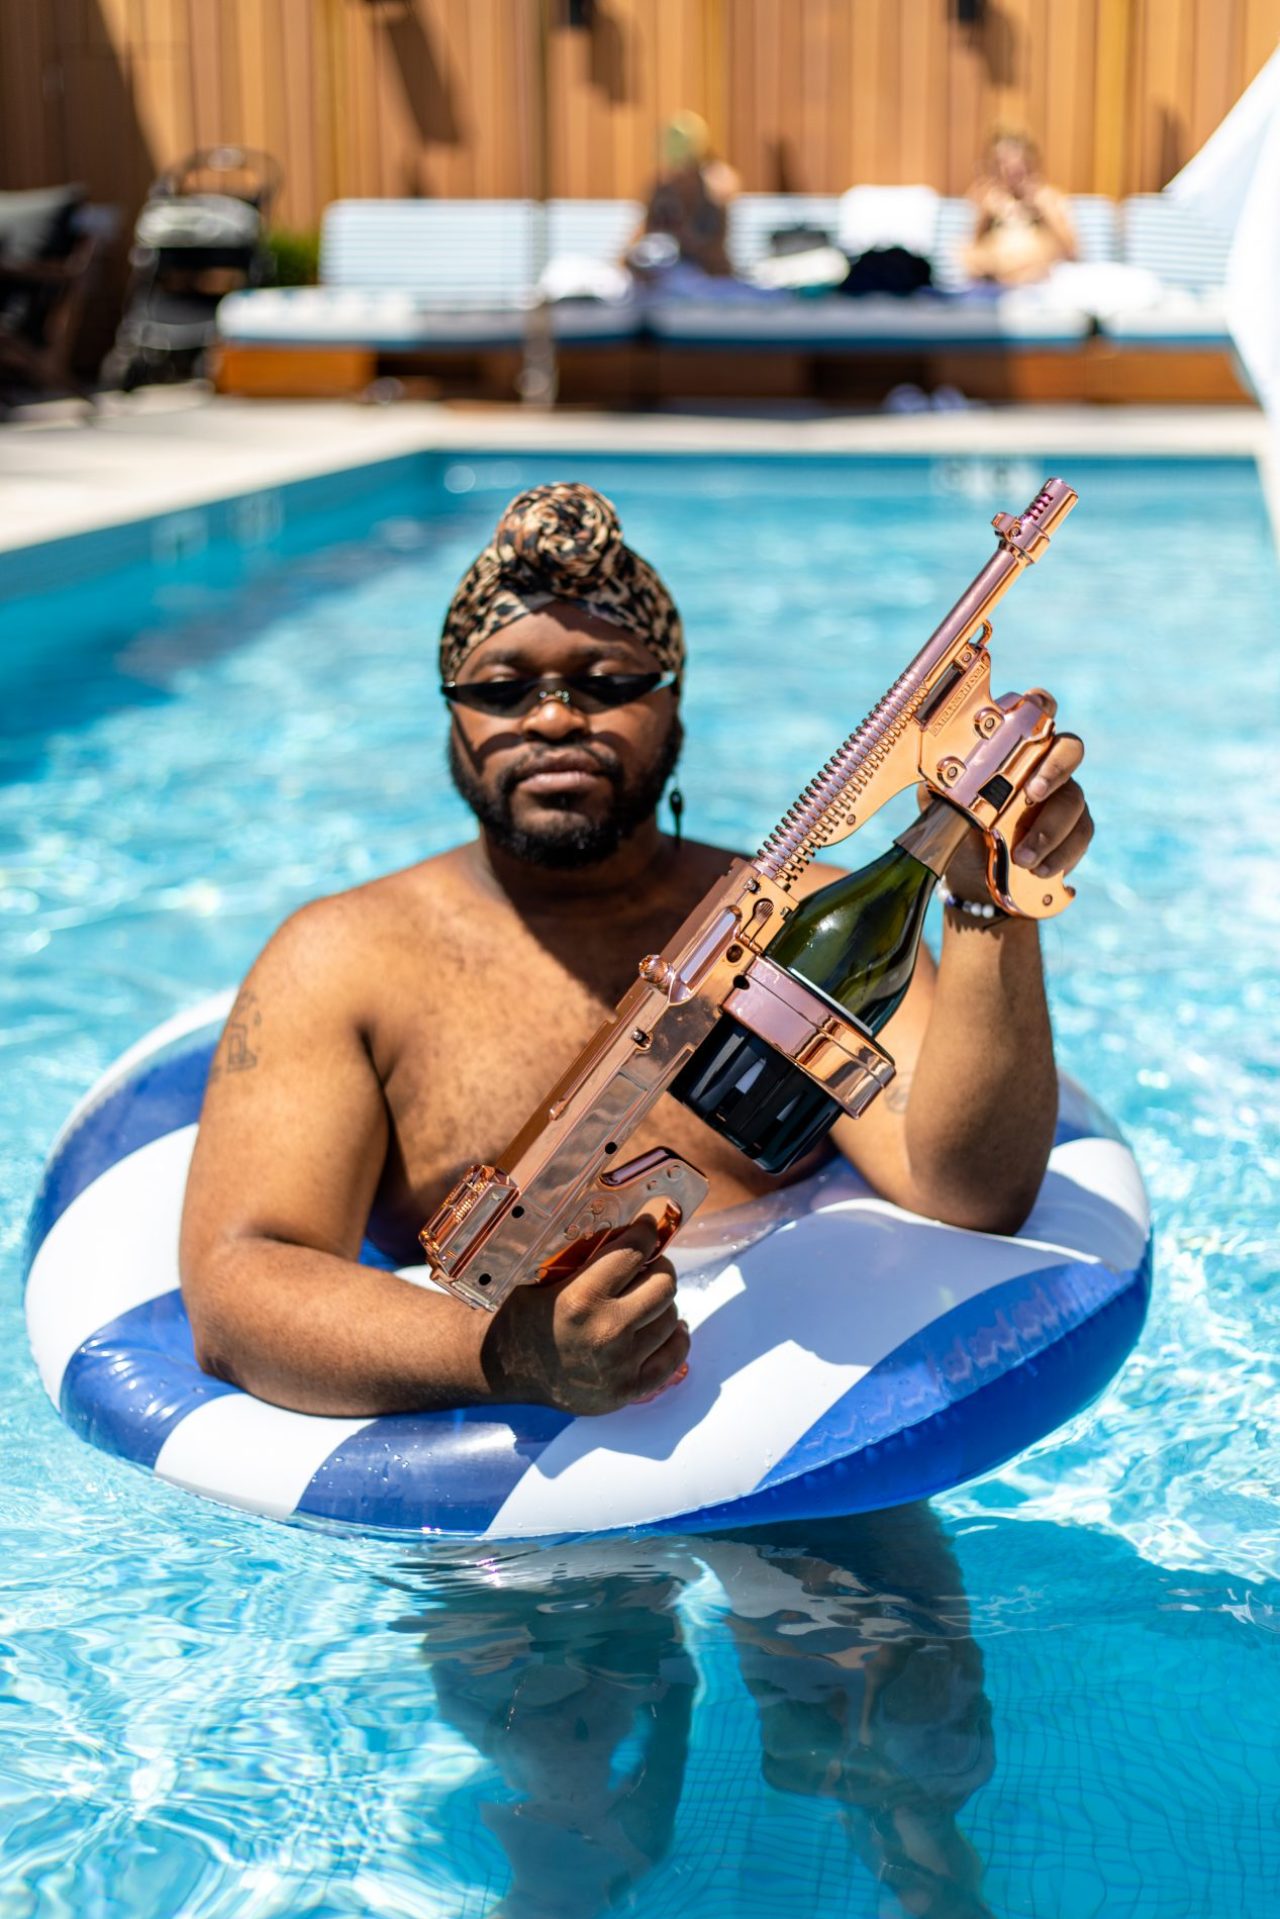 Male in a tube in the rooftop pool at the Clayton hotel holding a gun shaped device with a champagne bottle loaded in it